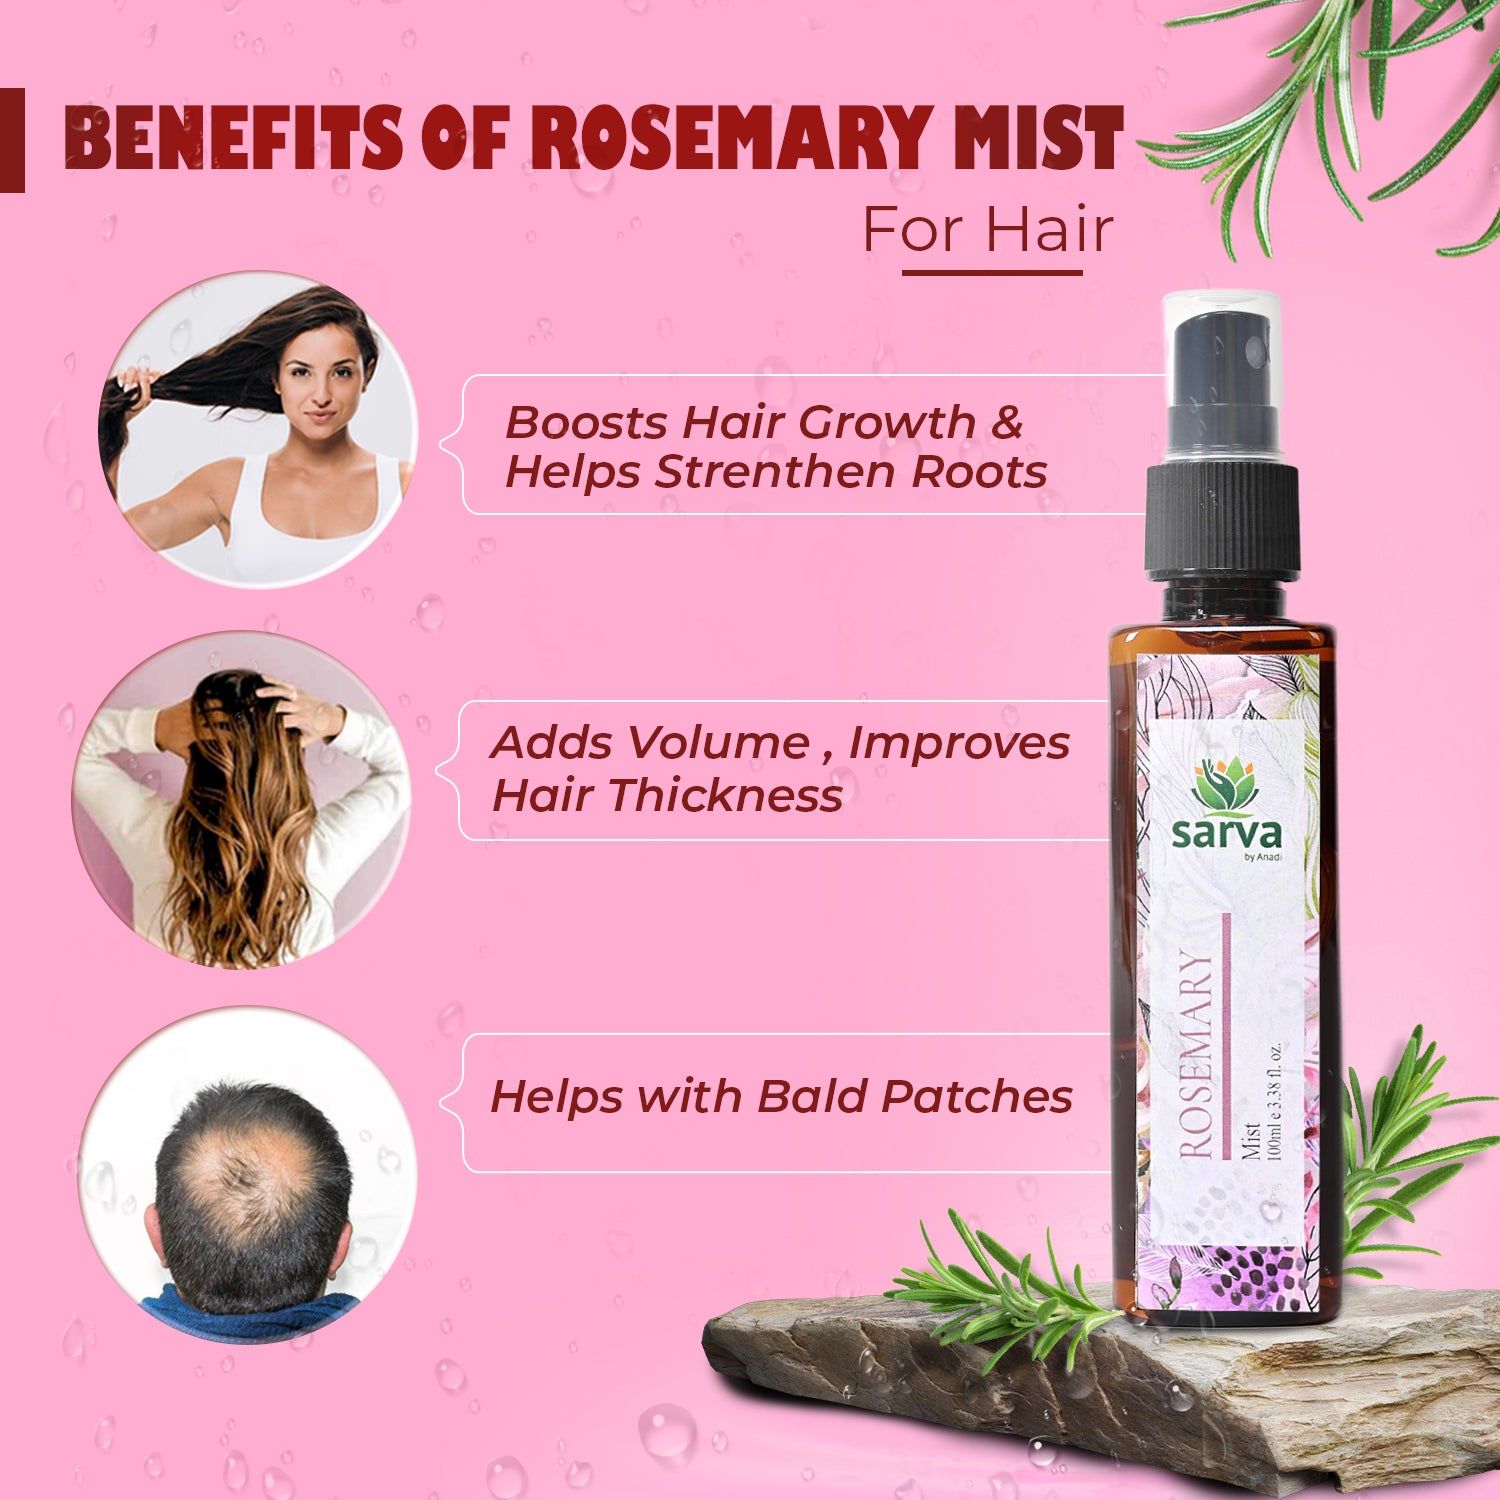 Rosemary Hair Growth Mist Thickening Rosemary Mist Receding Hairline Rosemary Low Porosity Hair Mist Organic Hair Growth Rosemary Oil Benefits Essential Oils for Healthy Hair, rosemary water, rosemary water for hair, rosemary water for hair growth, rosemary, best hair oil for hair growth, rosemary oil,  hair growth oil, hair growth tips, alps rosemary water